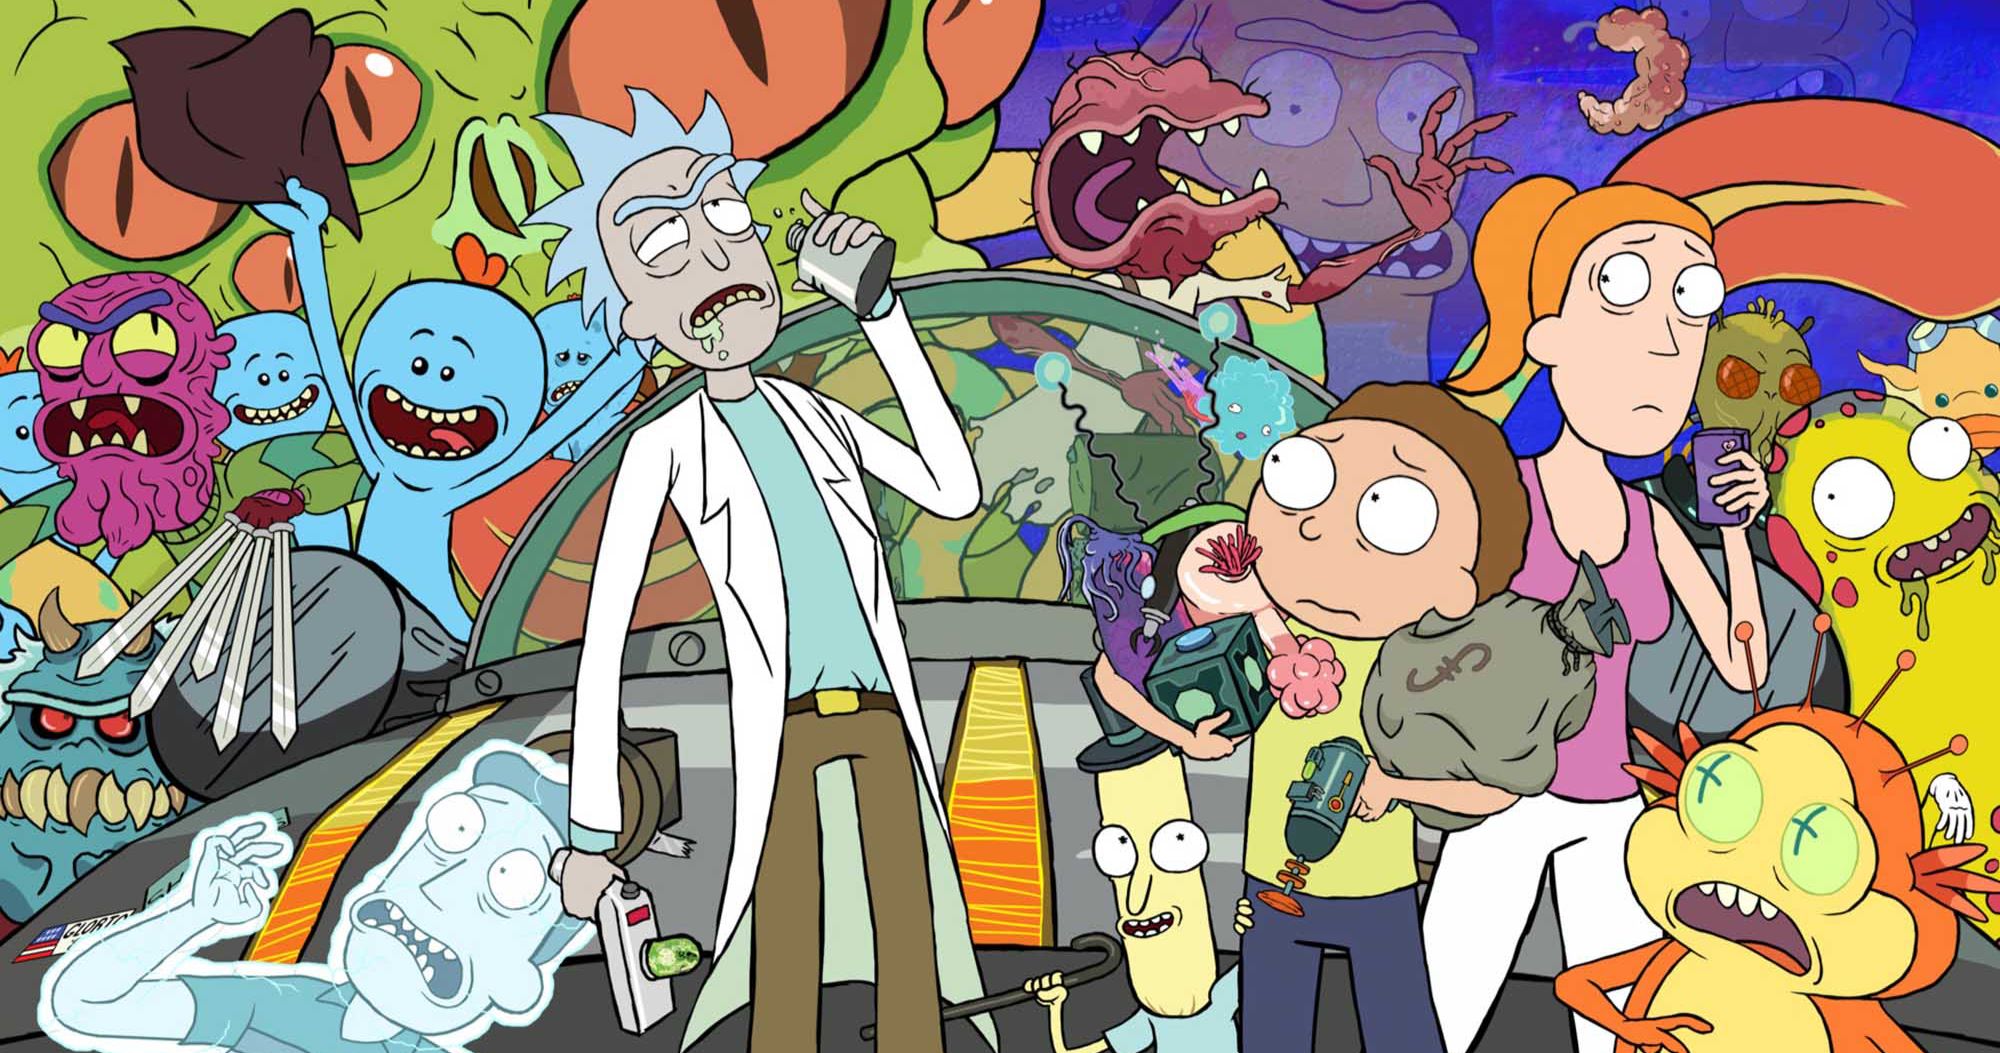 Rick and Morty Co-Creator Would Love to Make a Totally Bananas R-Rated Movie